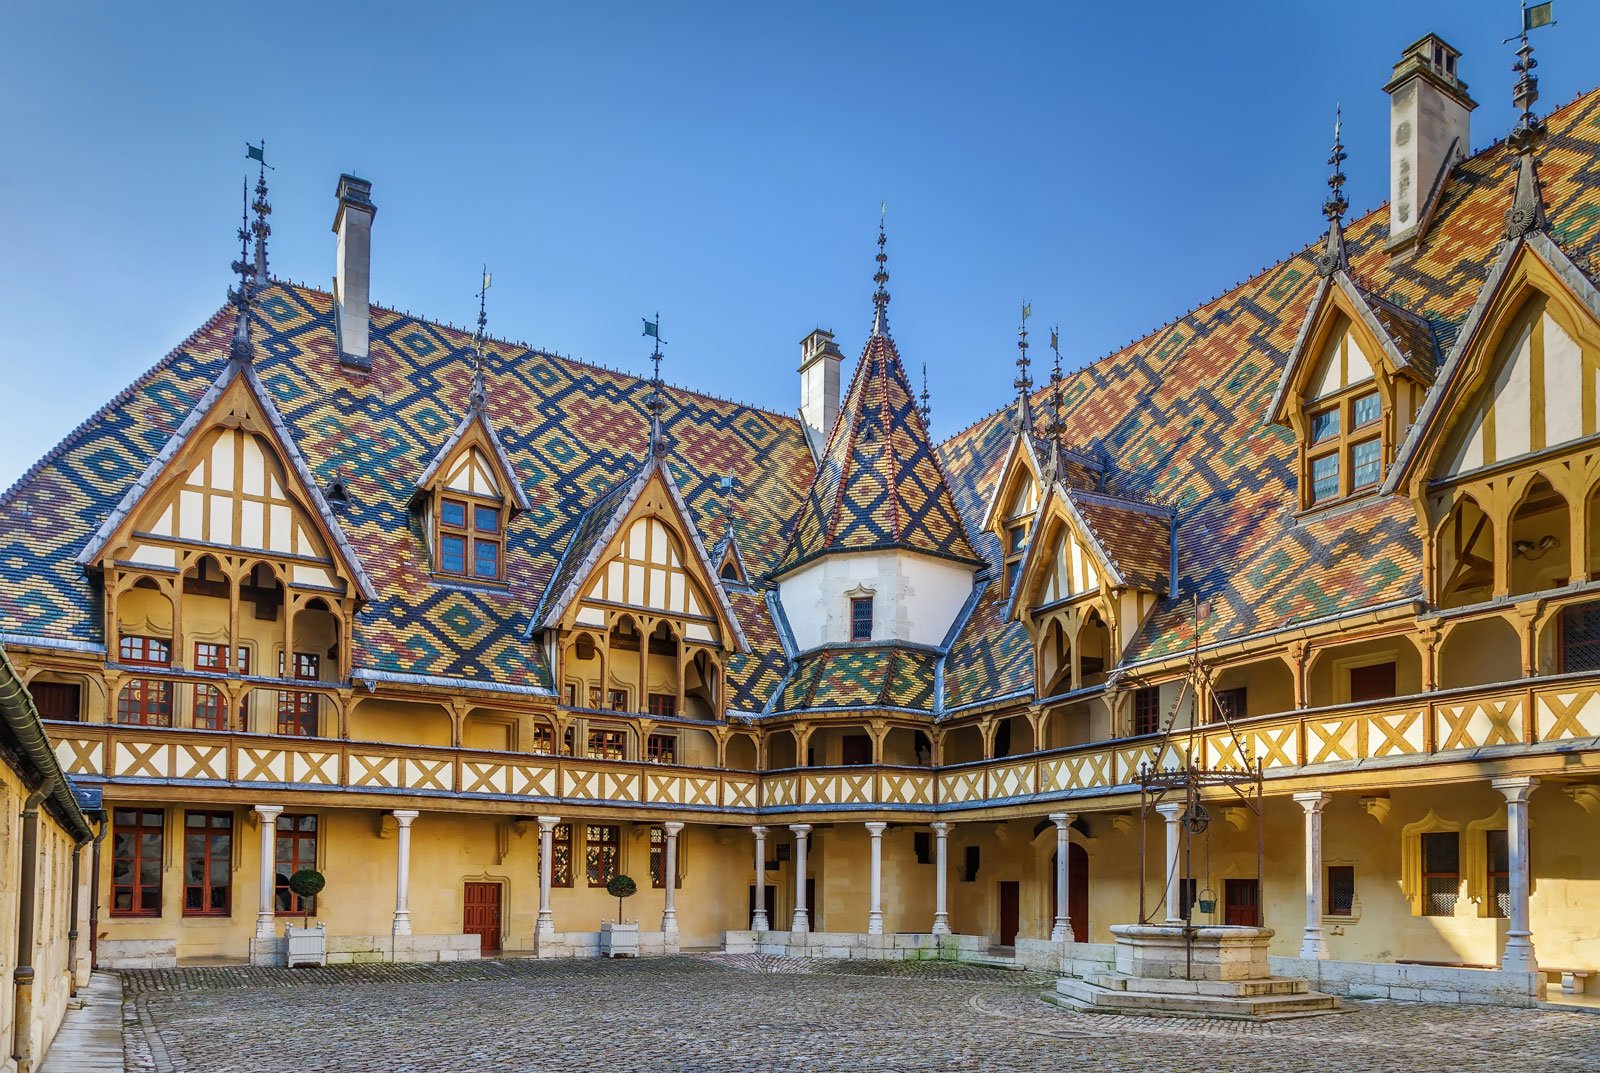 The medieval Hospices de Beaune, in spectacularly good condition